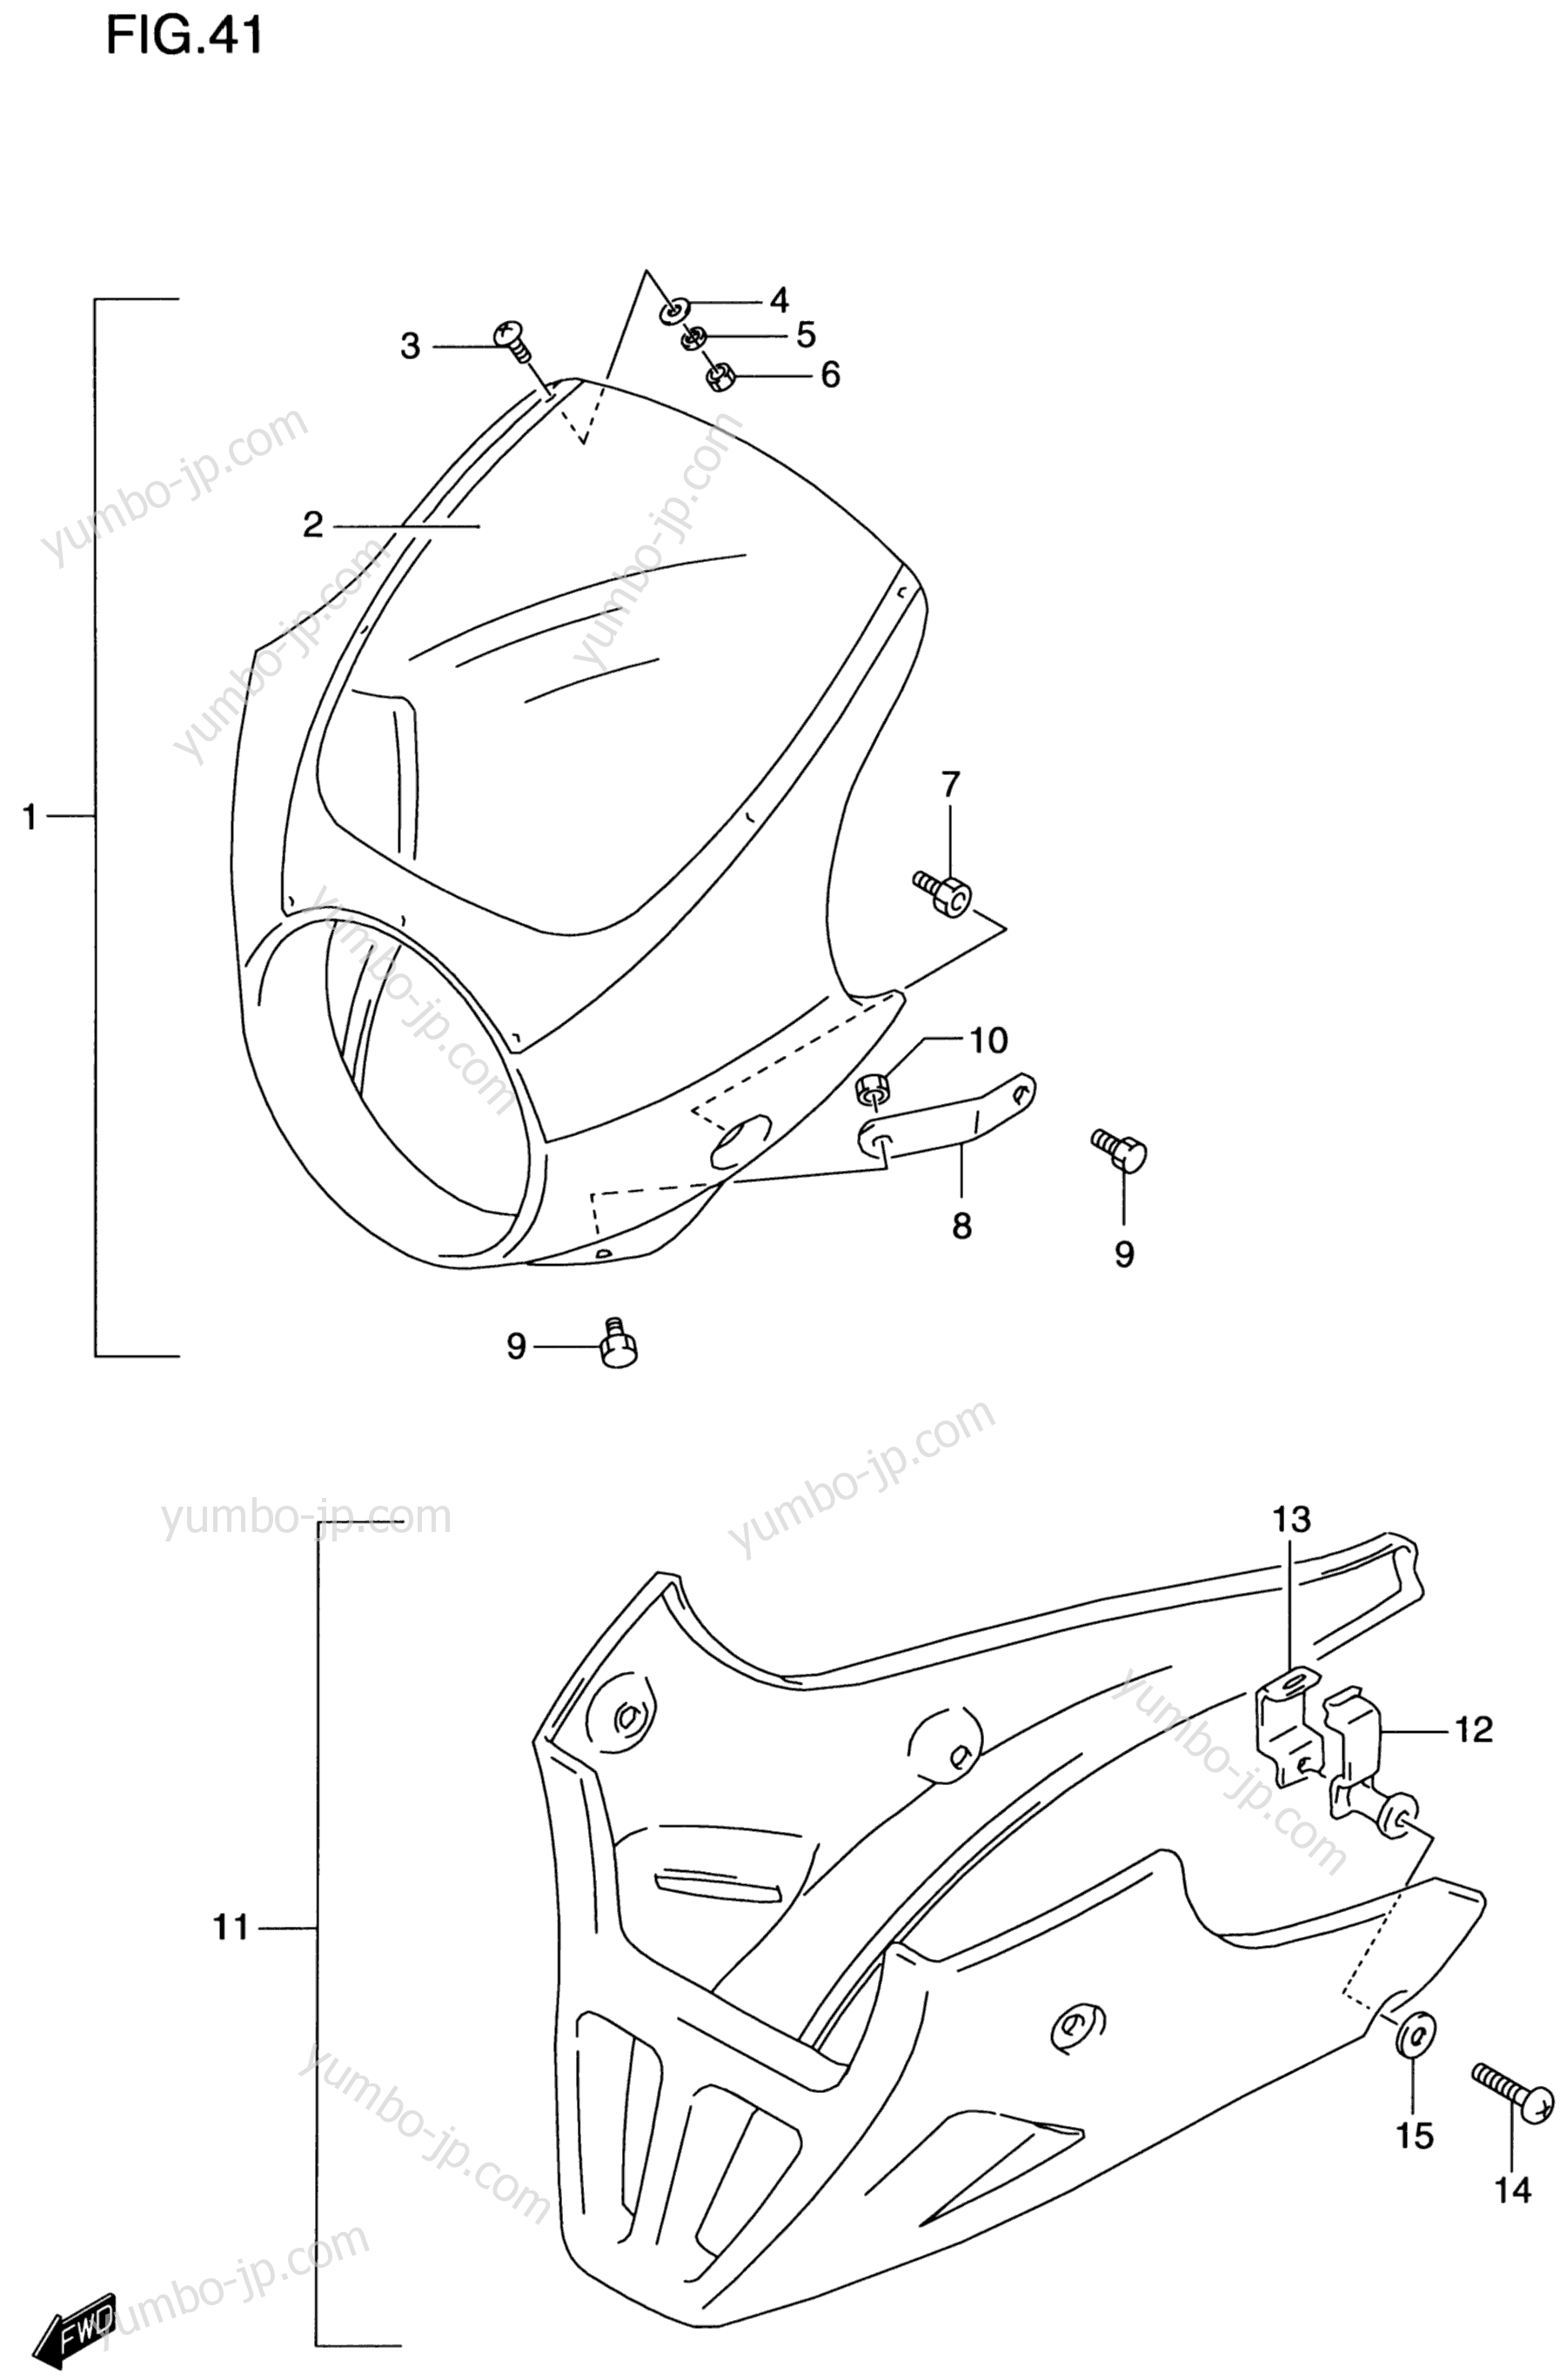 COWLING (OPTIONAL) for motorcycles SUZUKI GS500E 2000 year